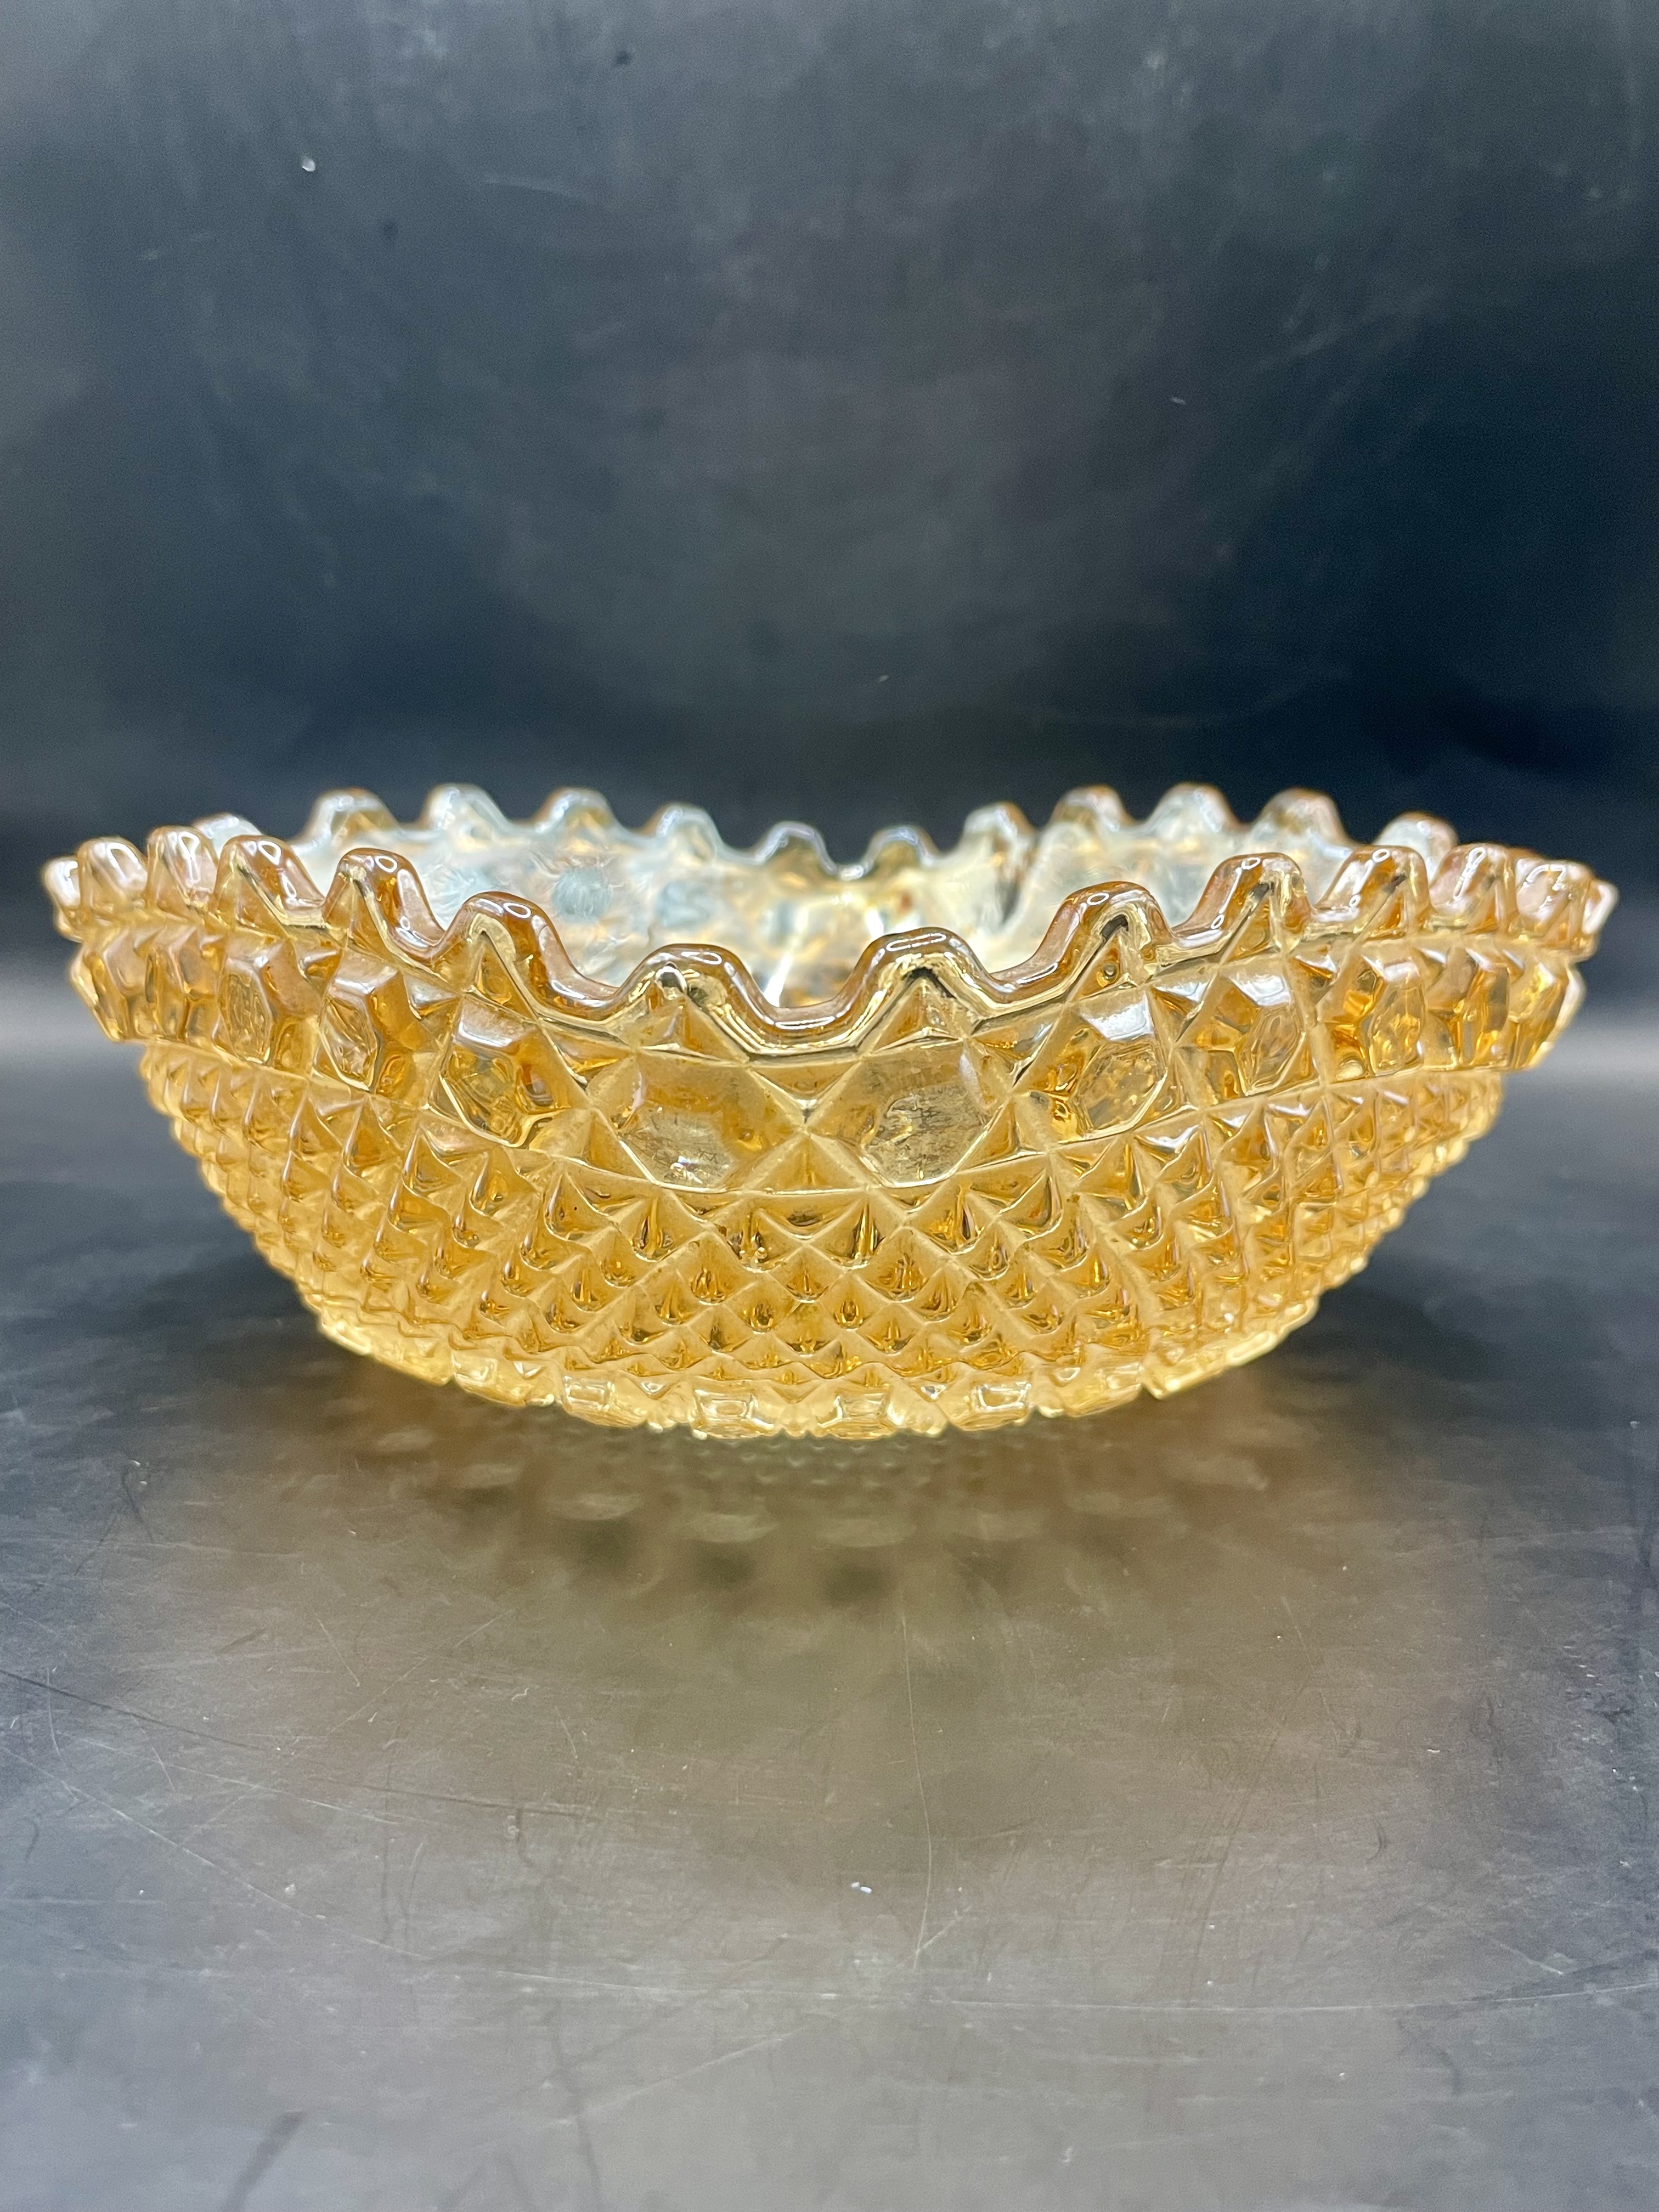 Lovey sowerby glass amber bowl  Great condition no chips or cracks.  - Image 5 of 11